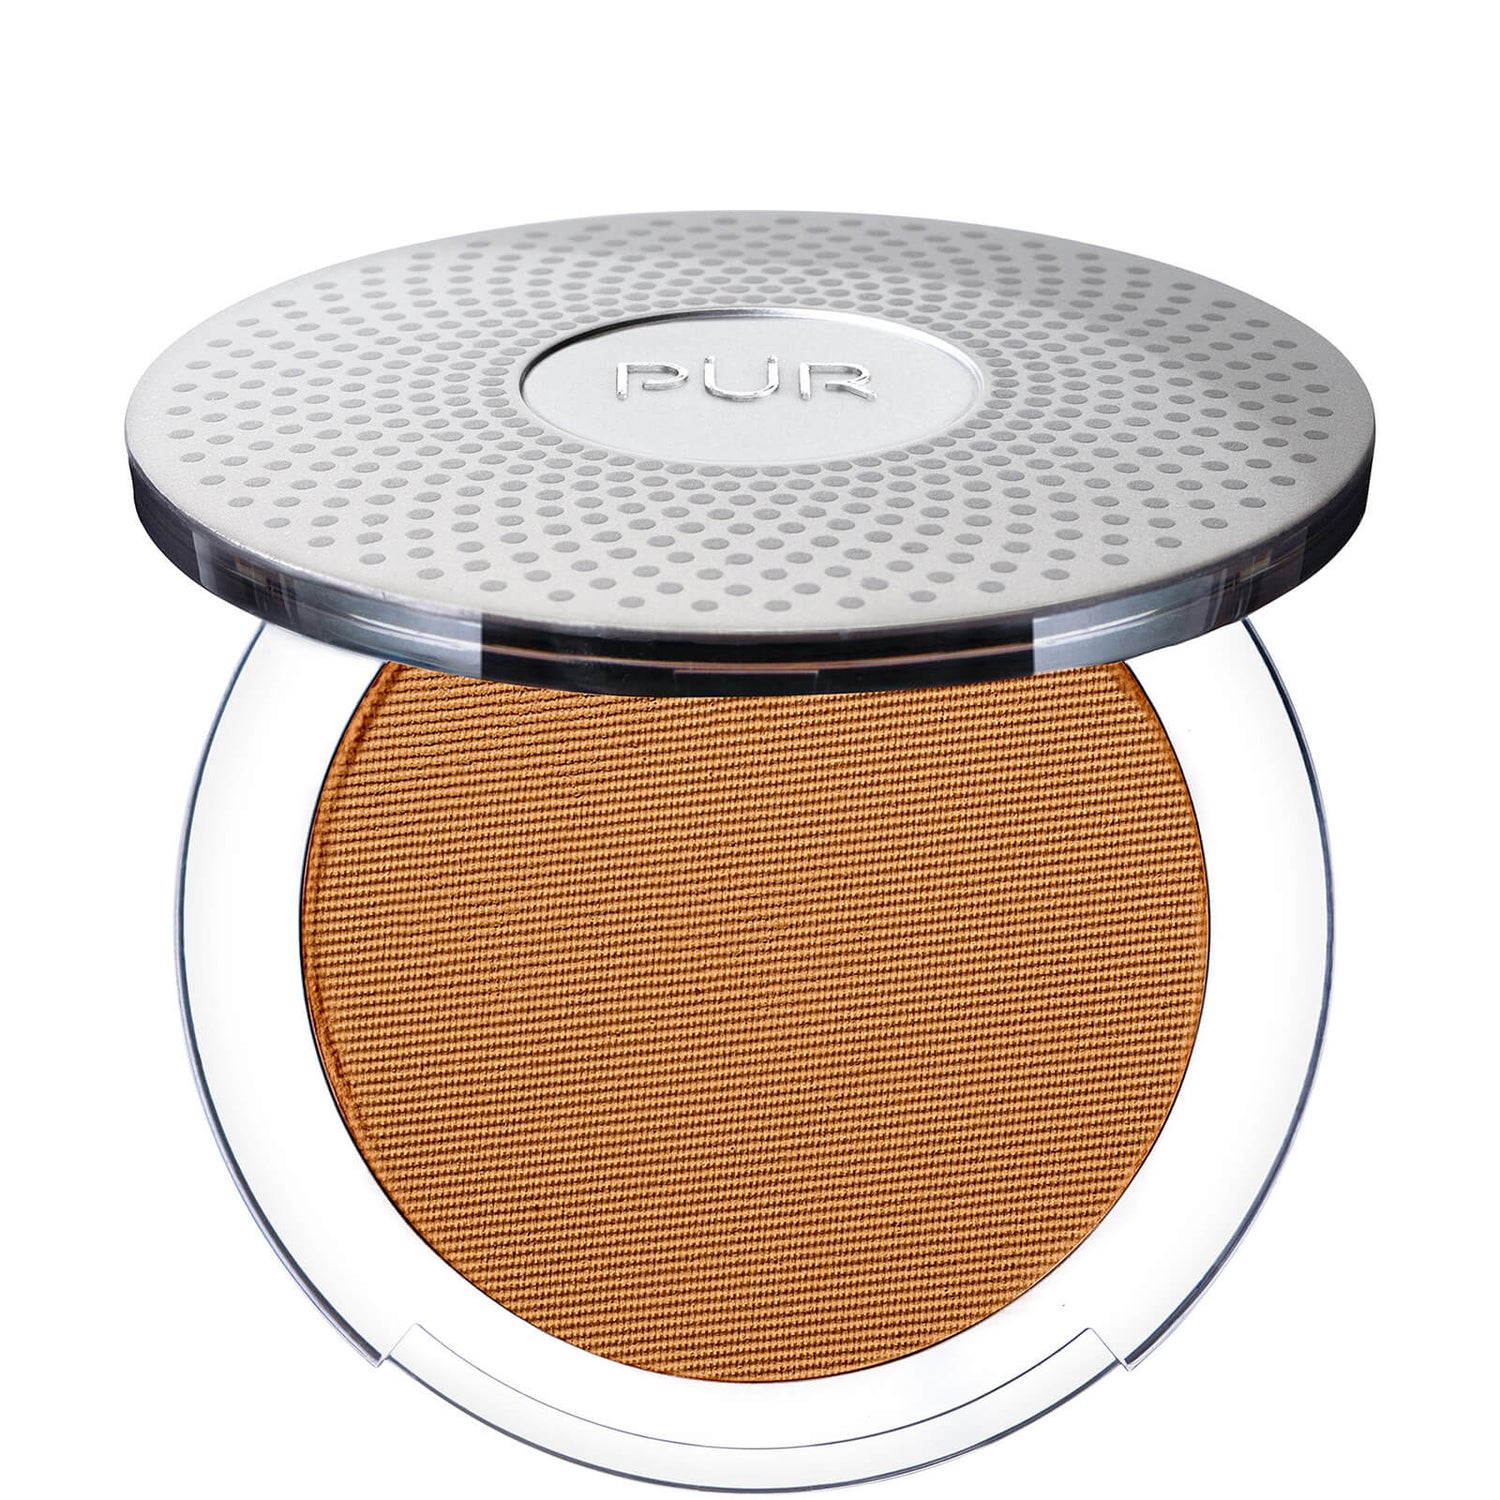 PÜR 4-in-1 Pressed Mineral Make-up 8g (Various Shades)